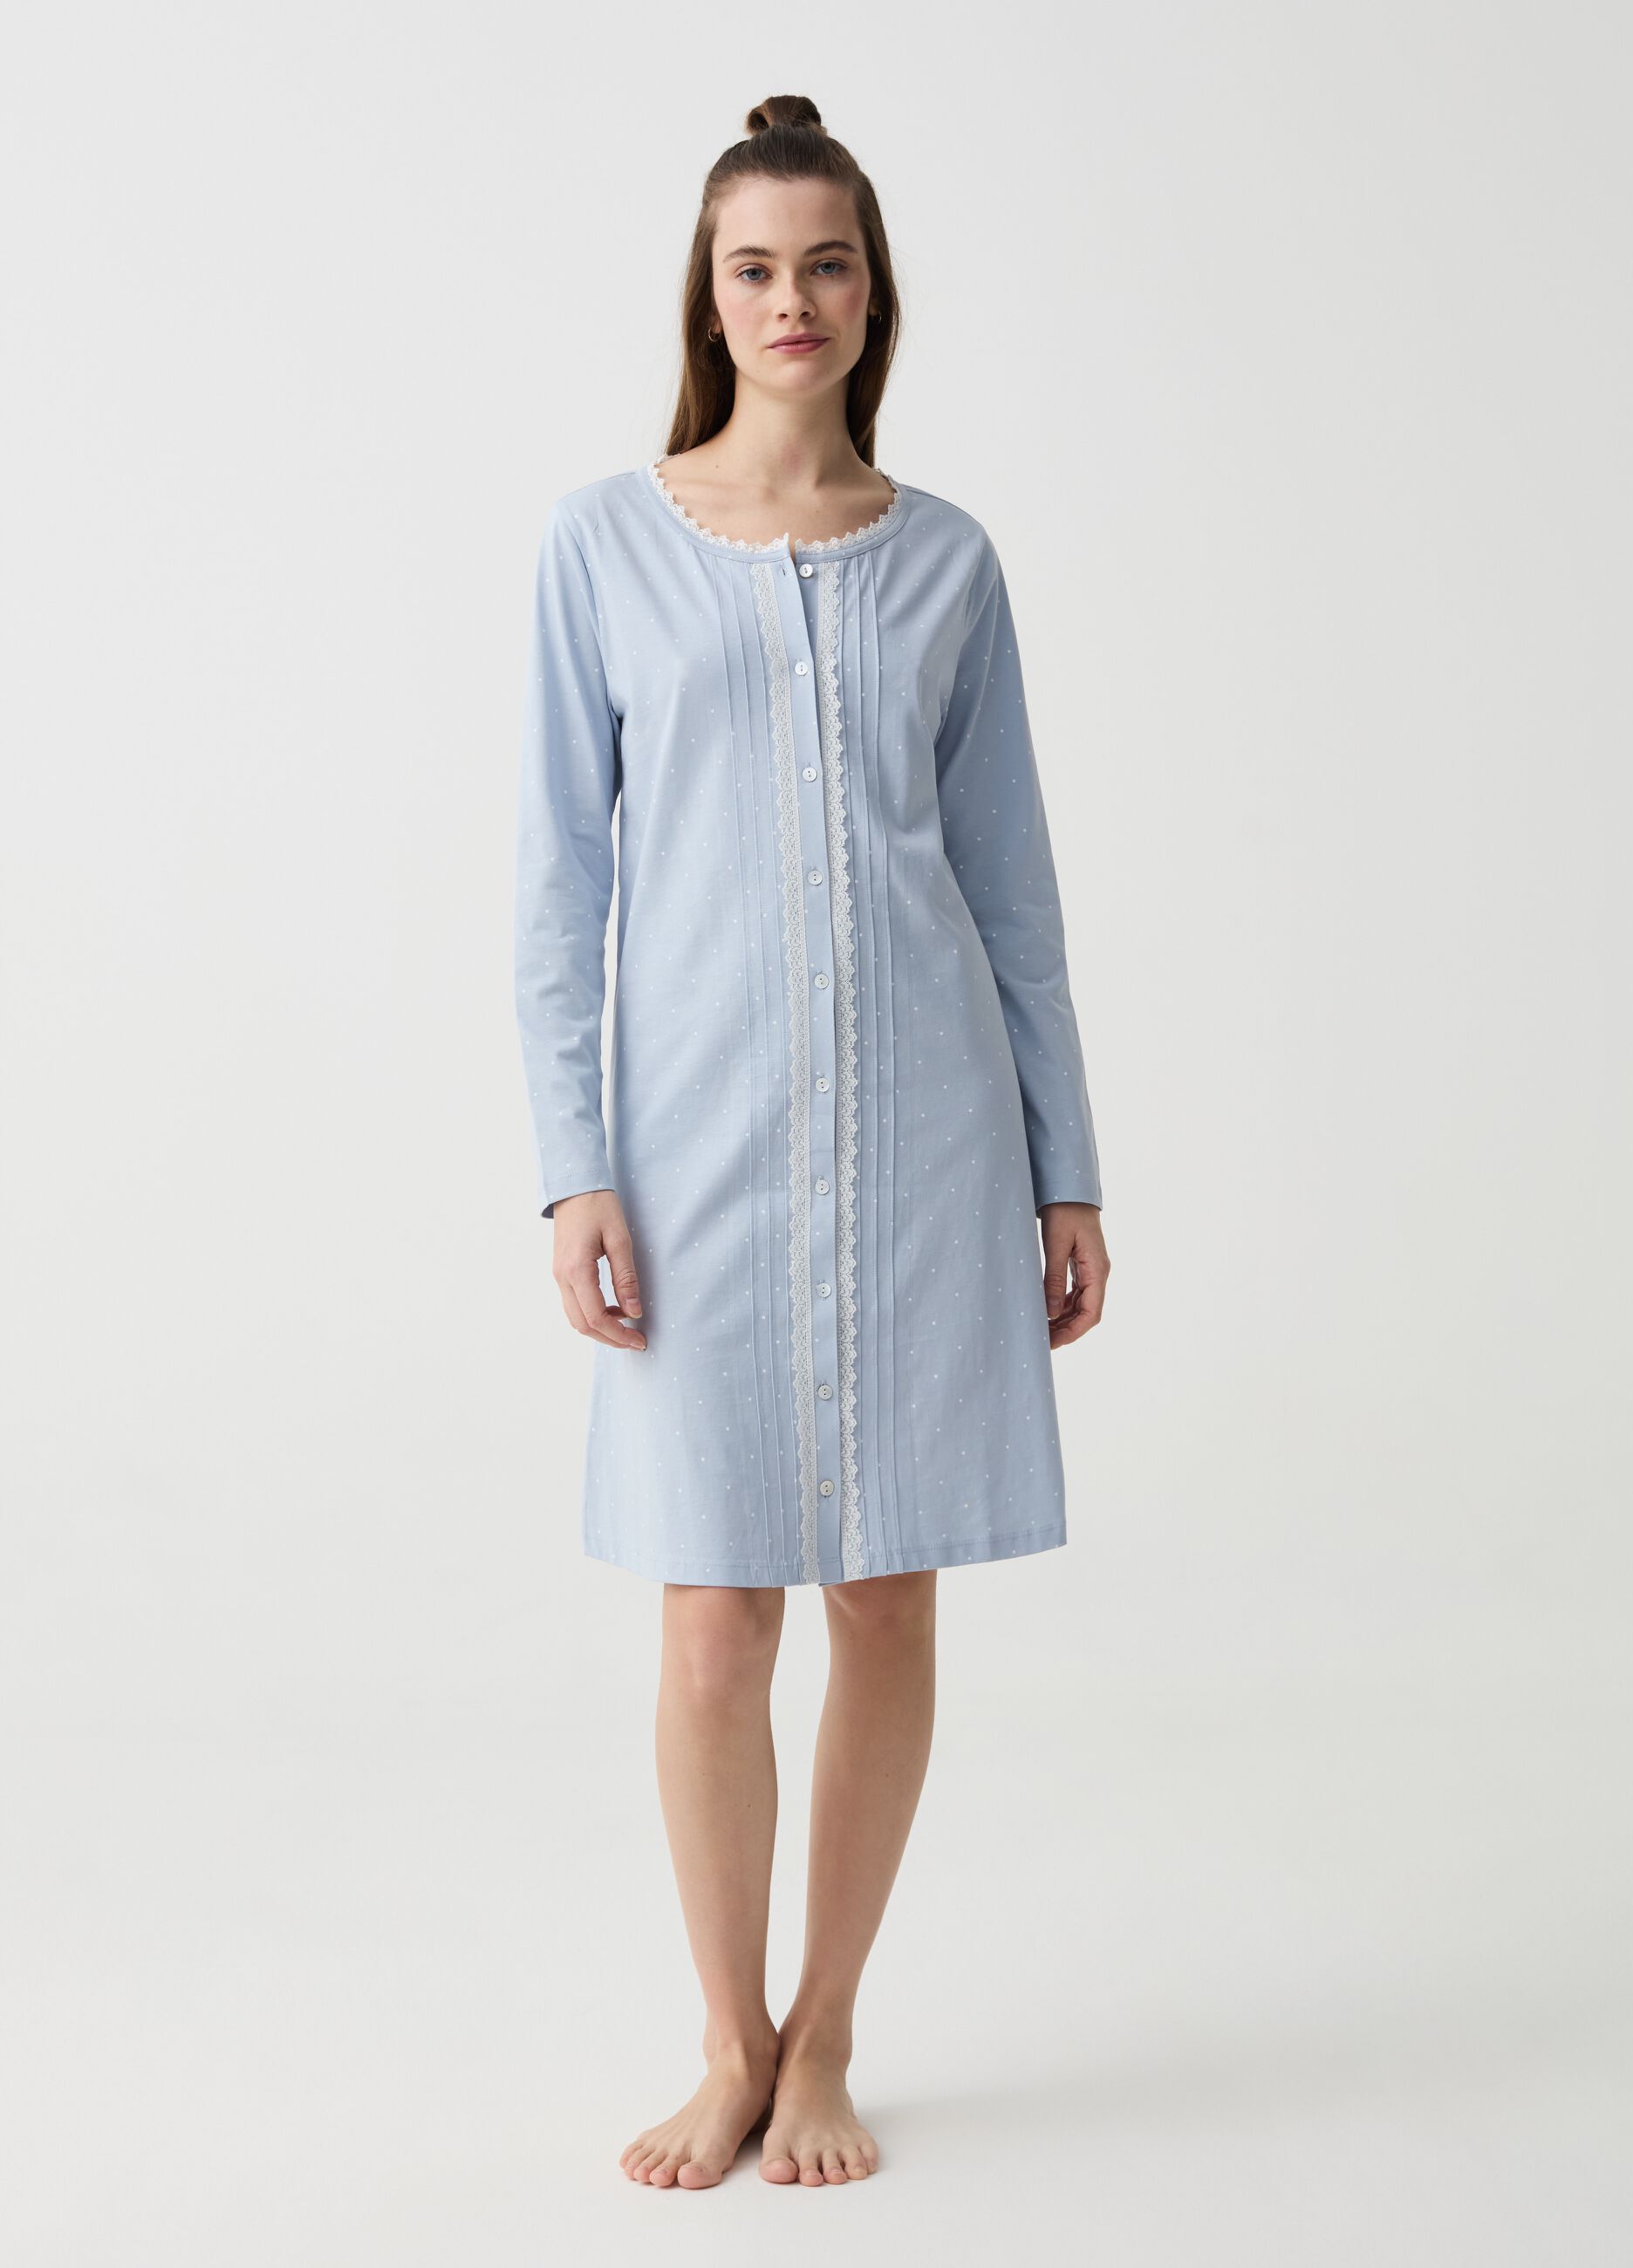 Polka dot nightdress with buttons and lace